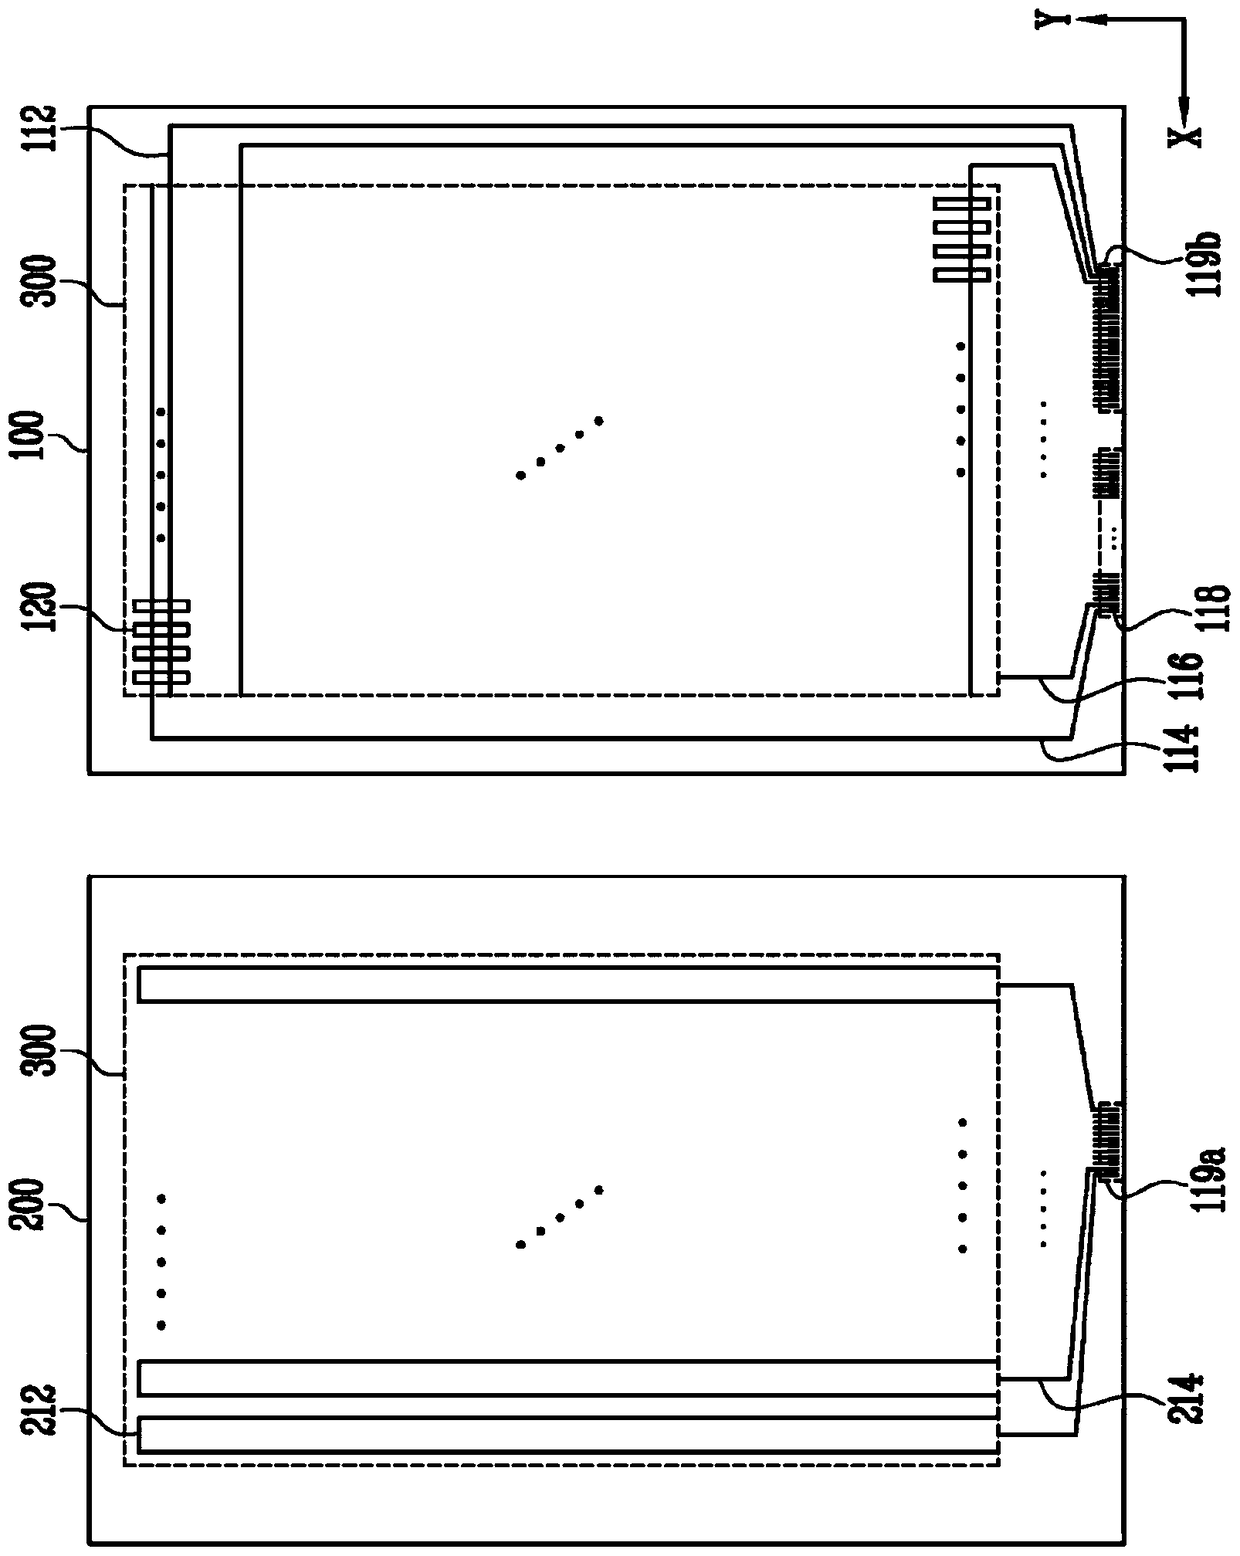 Organic light emitting display integrated with touch screen panel